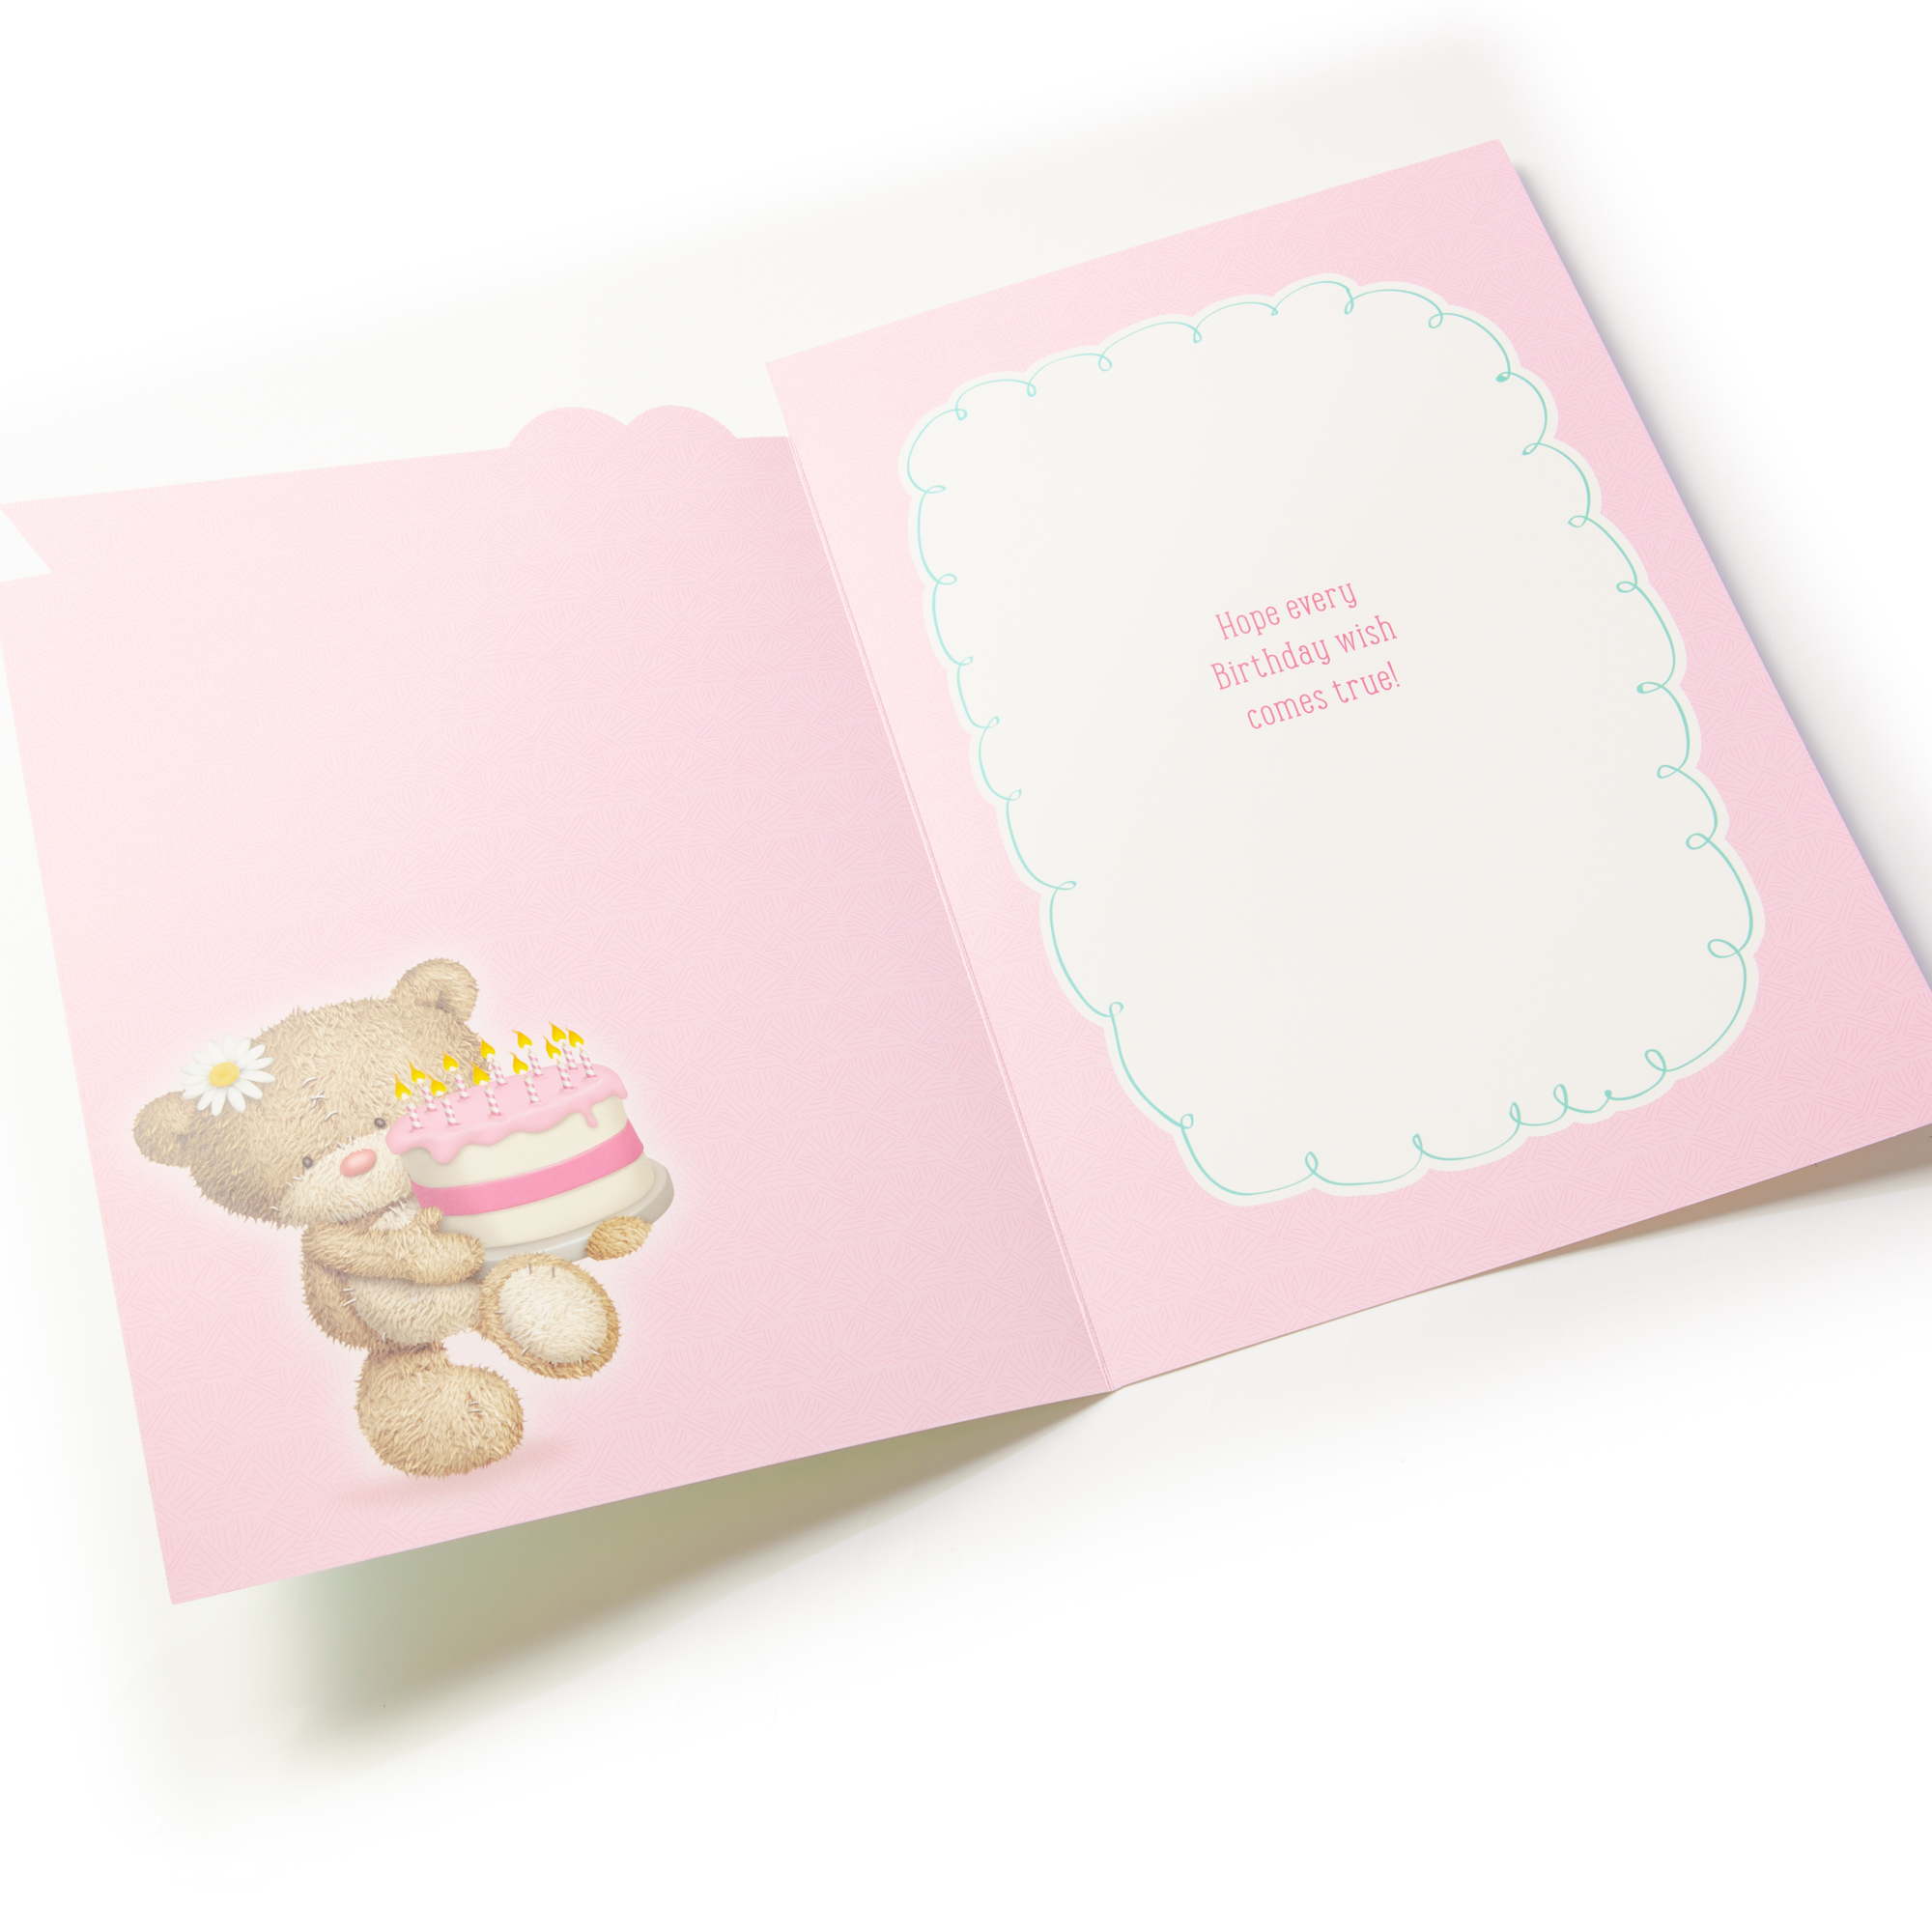 Giant Hugs Bear Birthday Card - For You Daughter 